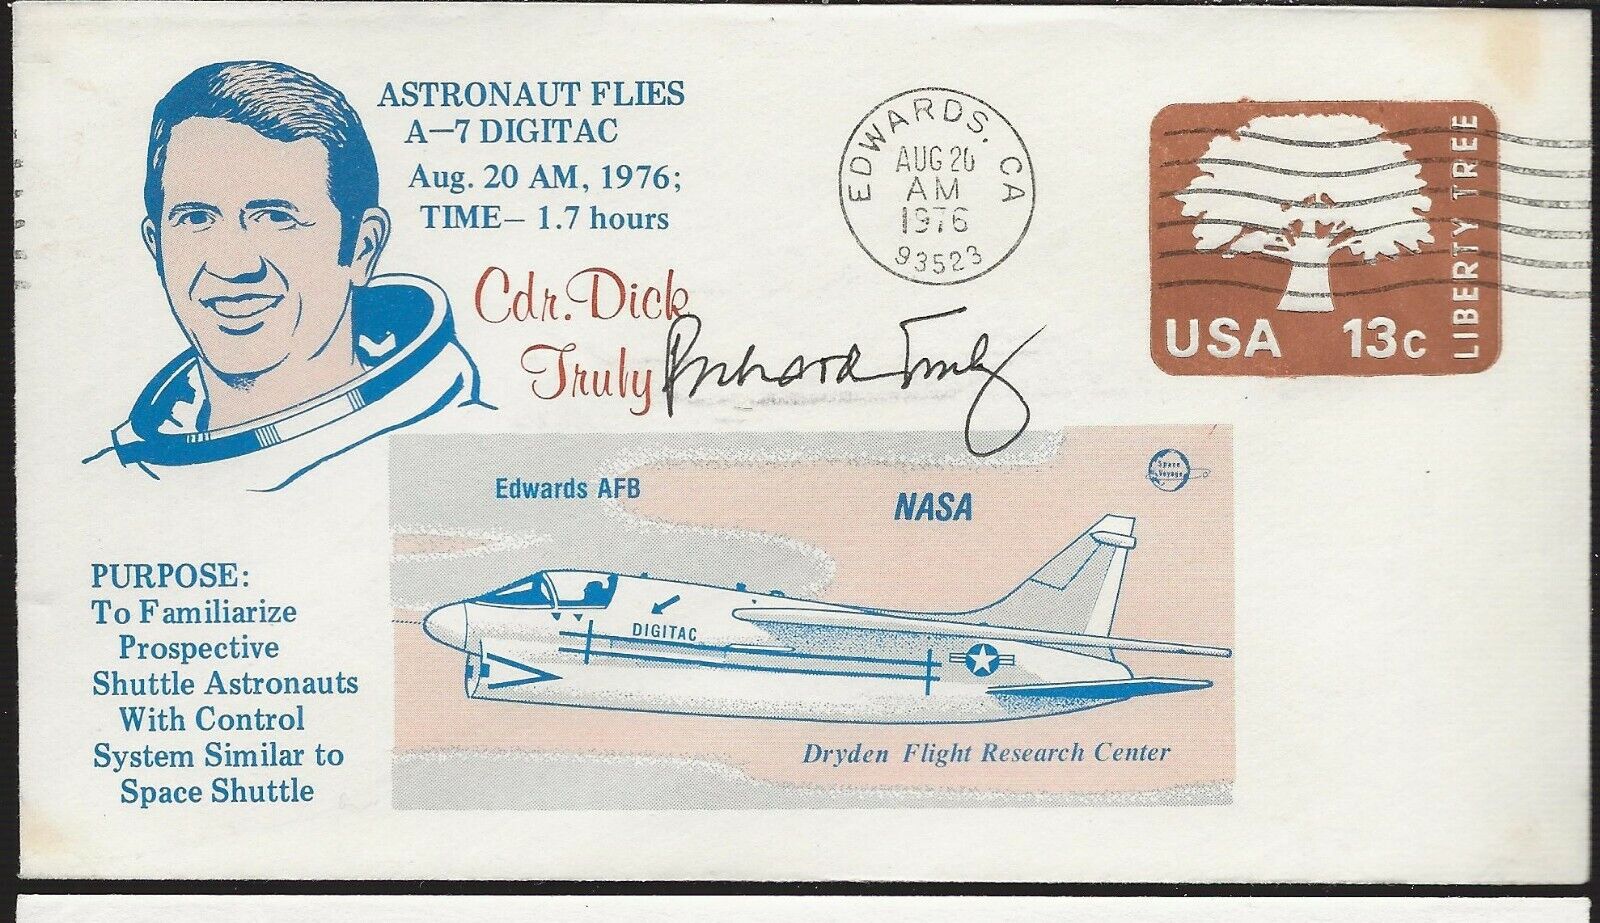 1976 Astronaut Truly Flies A-7 Digitac, Autographed by Dick Trul